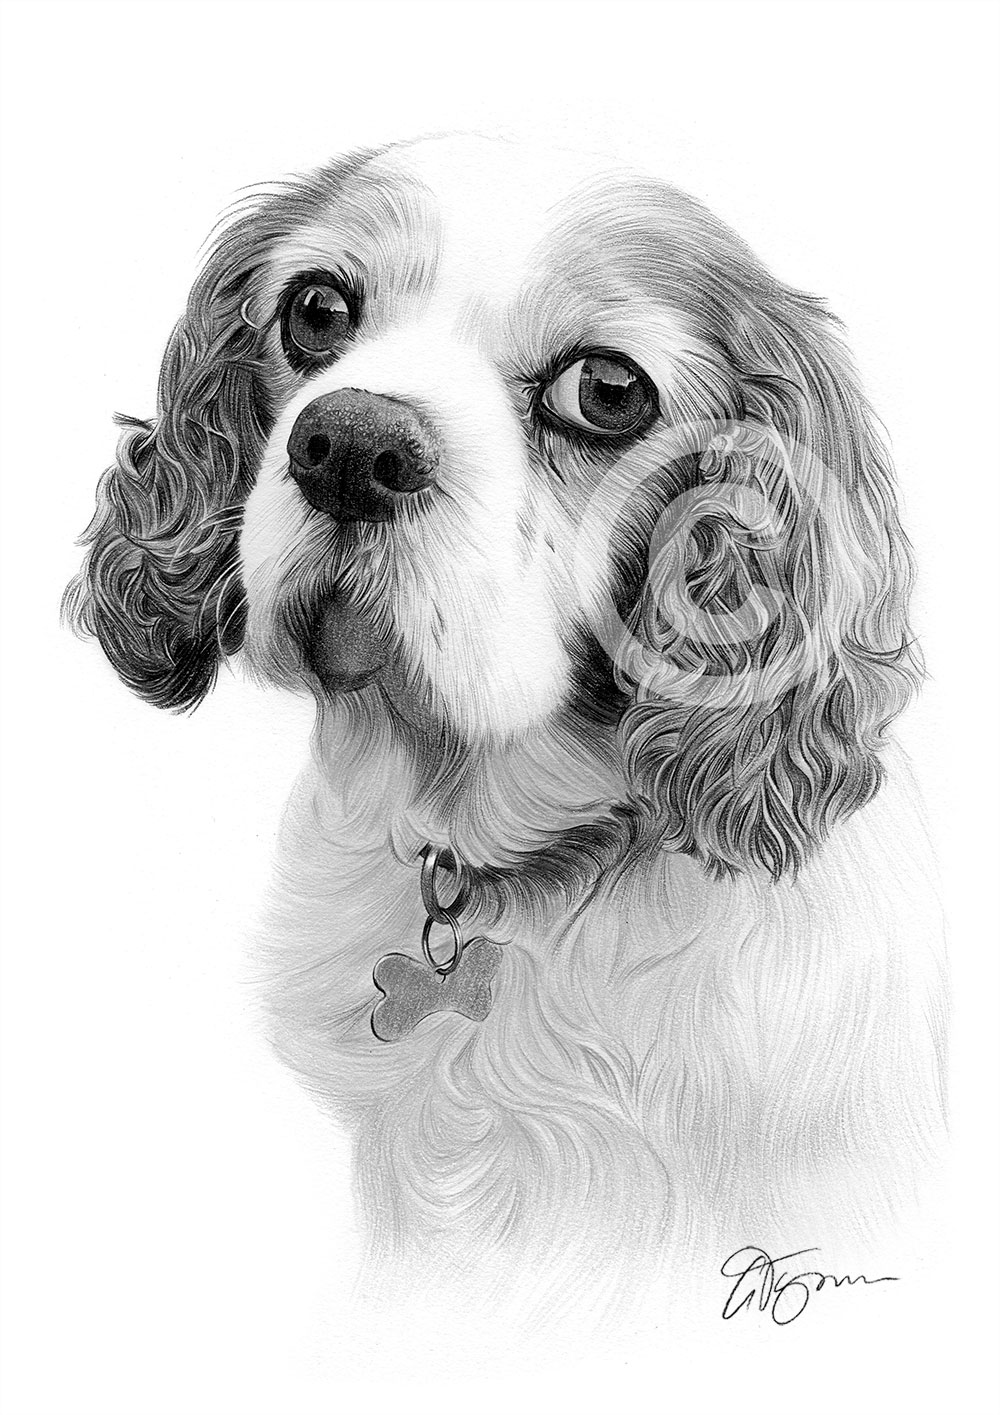 Pencil drawing of a young King Charles Spaniel by artist Gary Tymon